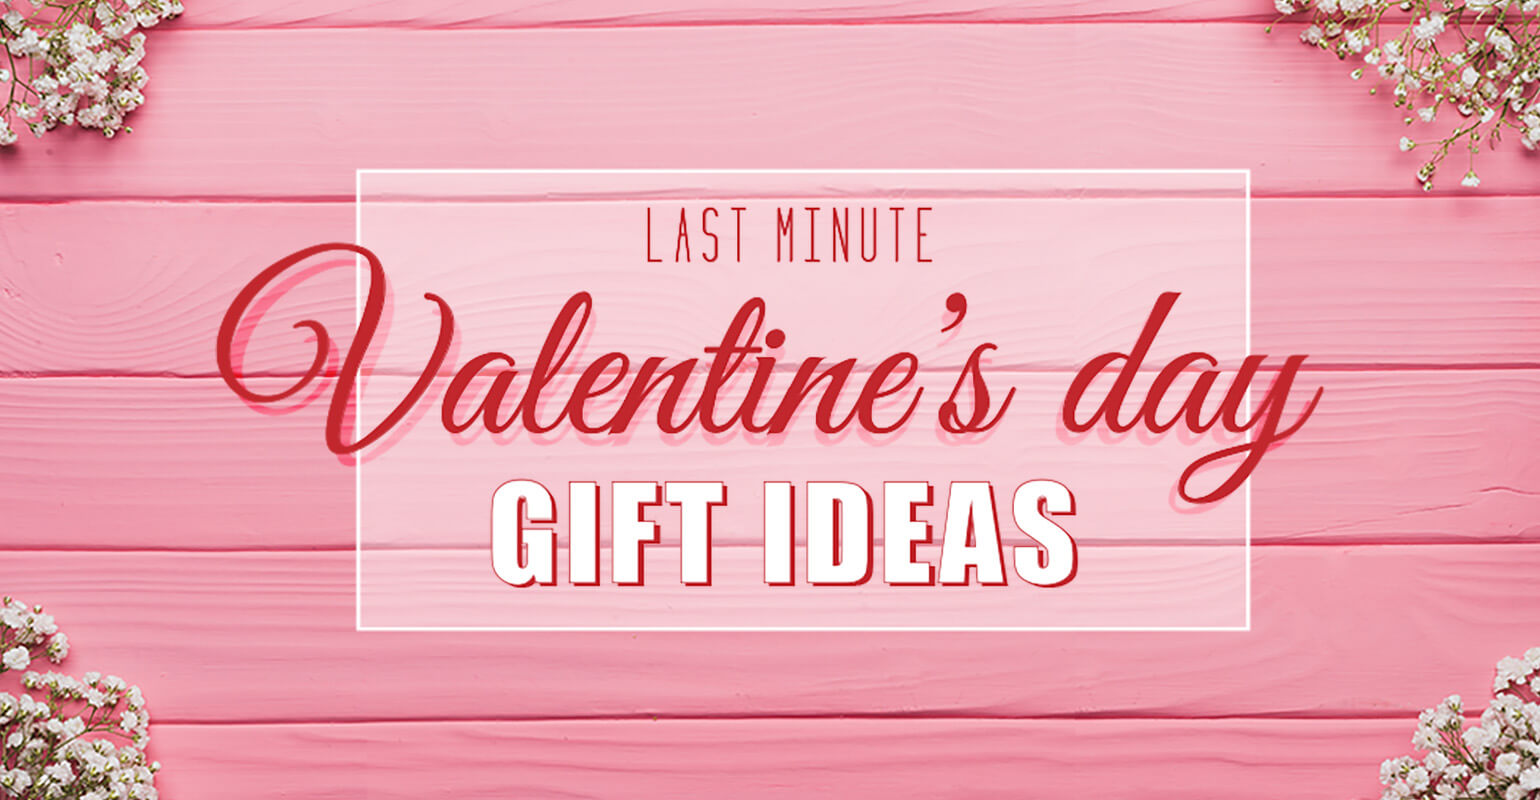 Last Minute Valentine's Day Shopping Guide